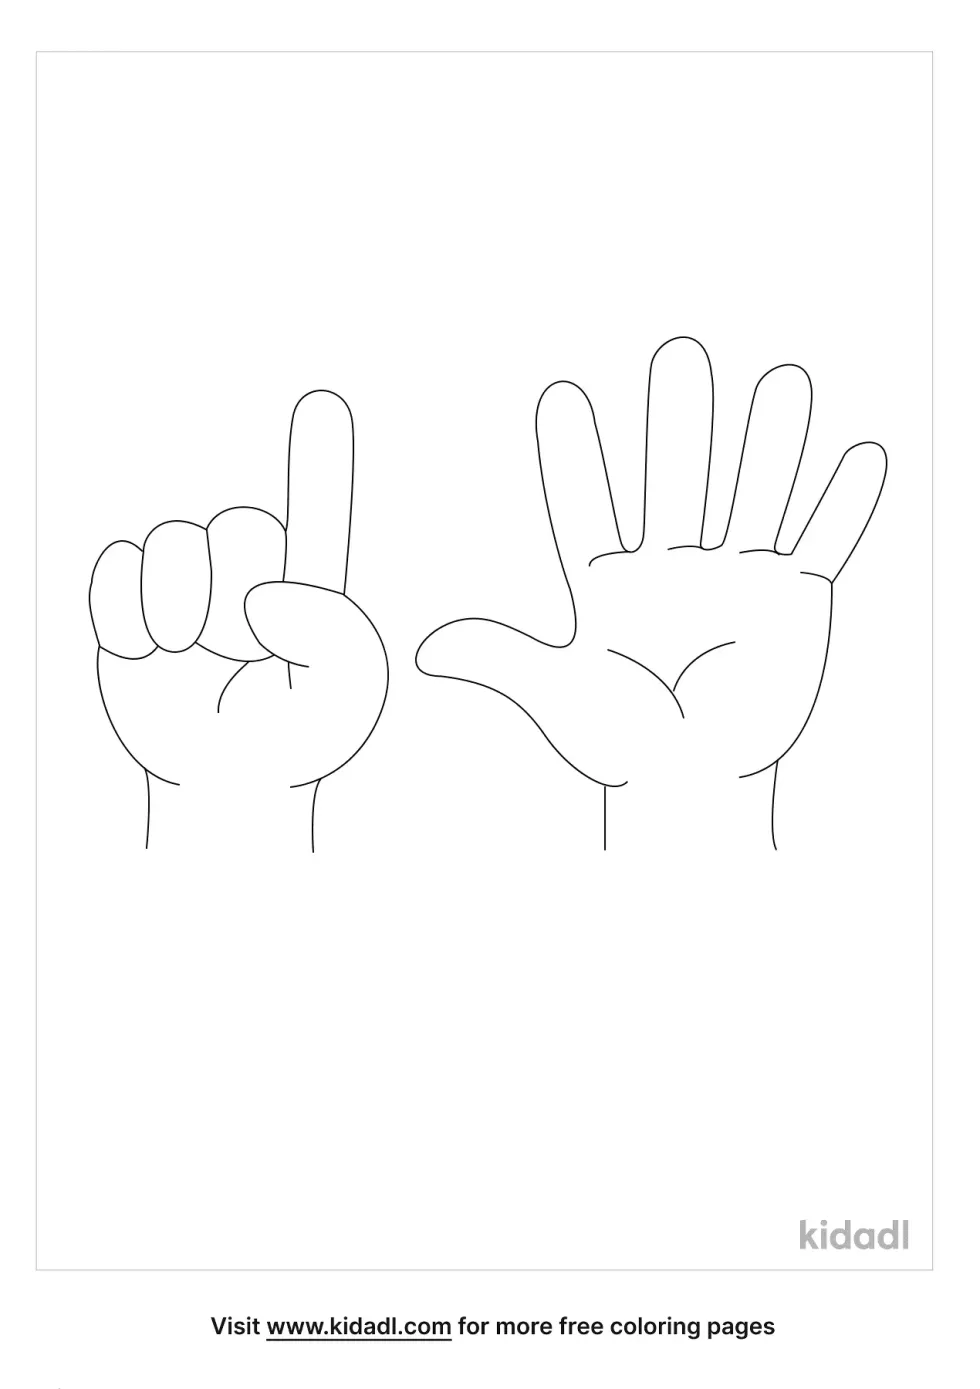 6 Fingers Coloring Page